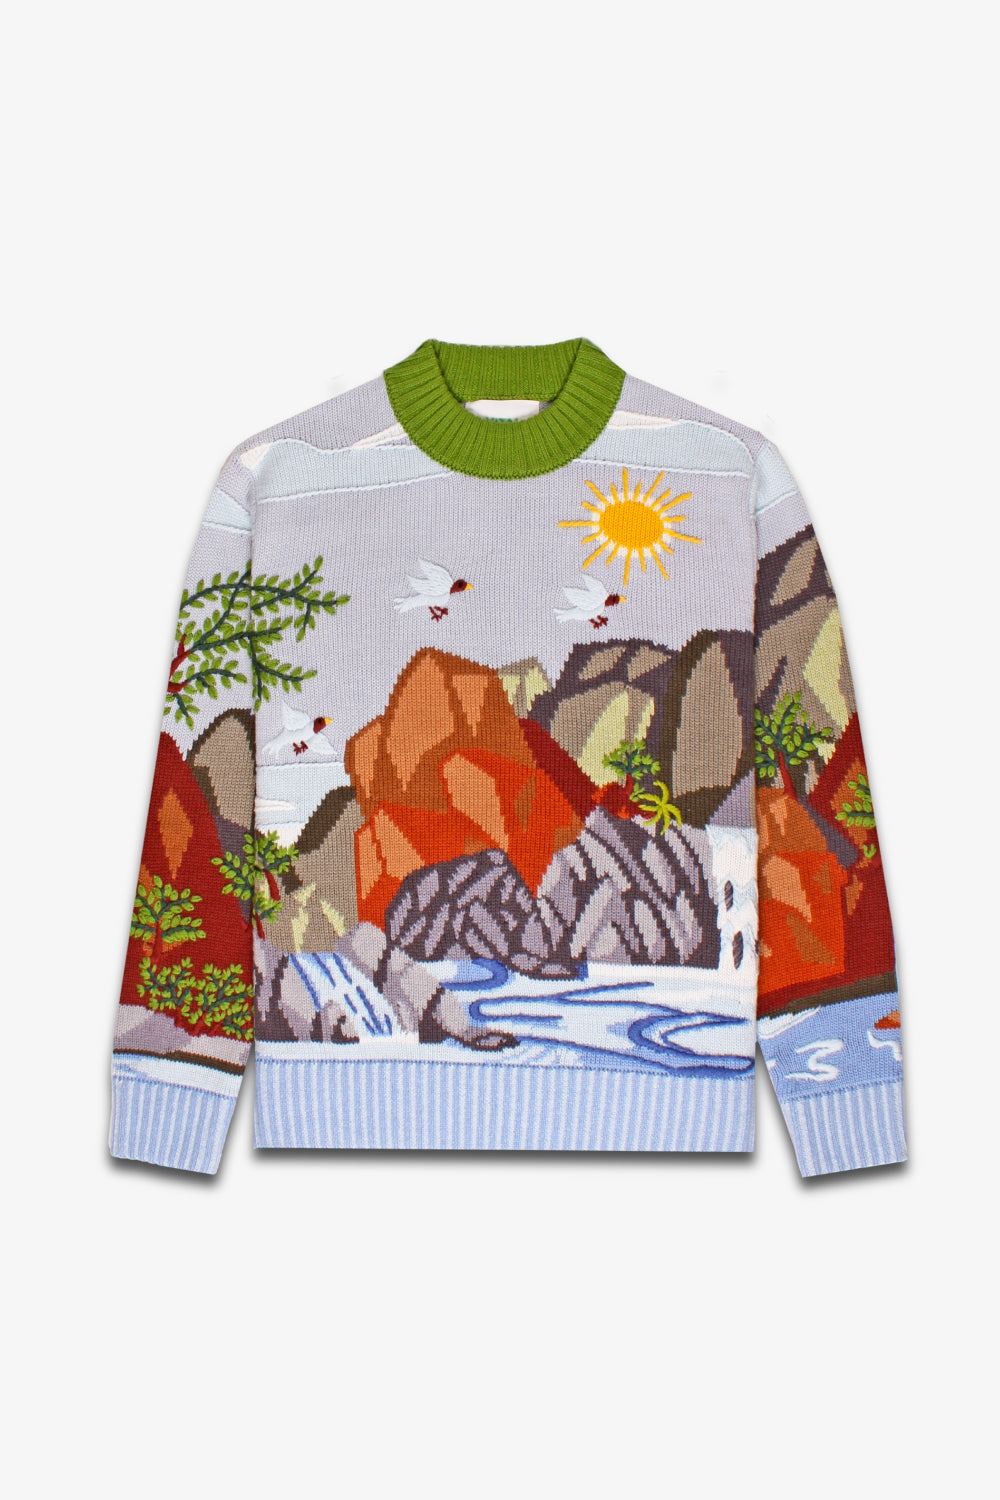 Rising Sun Hand Embroidery Sweater